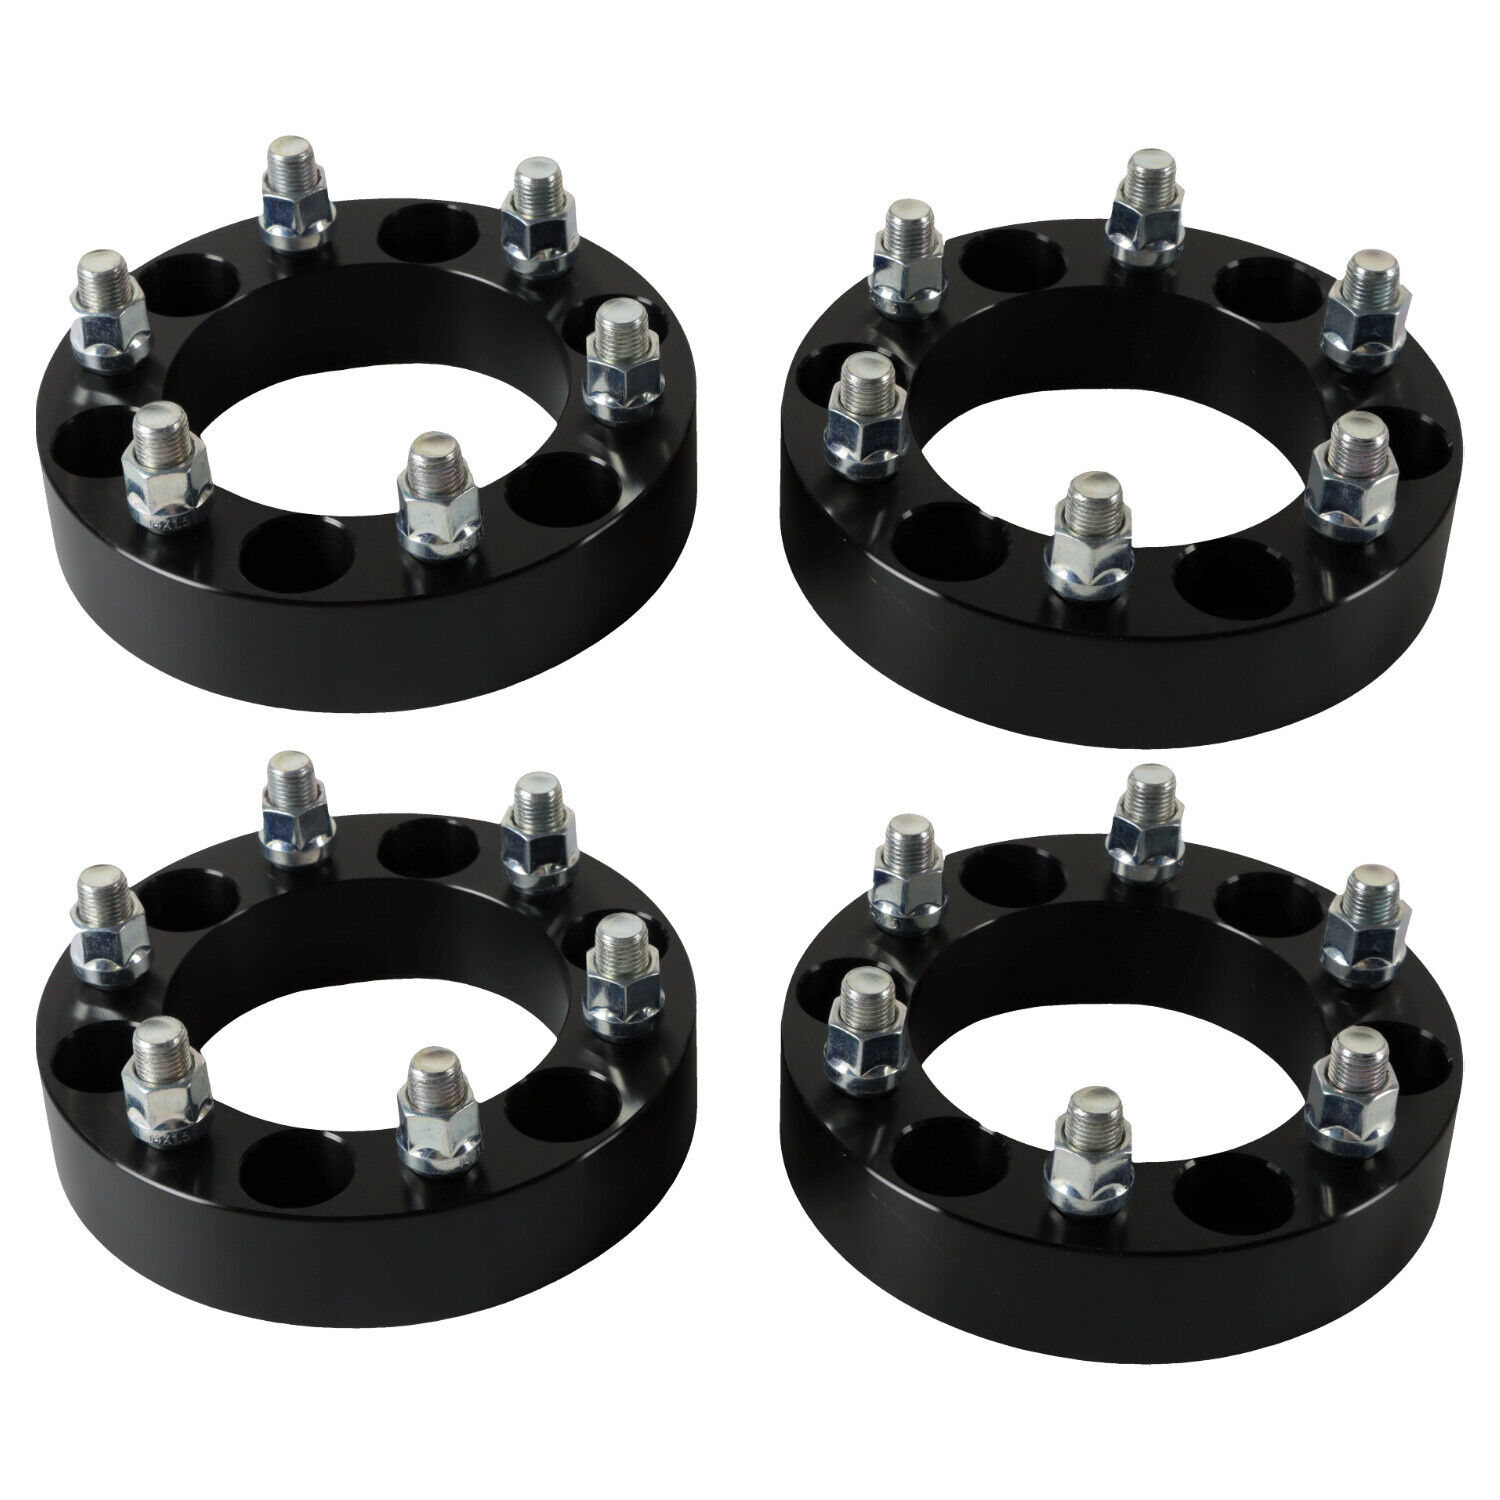 4x Wheel Spacers 1.5inch 6x5.5,14x1.5 Studs 108mm Hub Bore for Cadillac Escalade